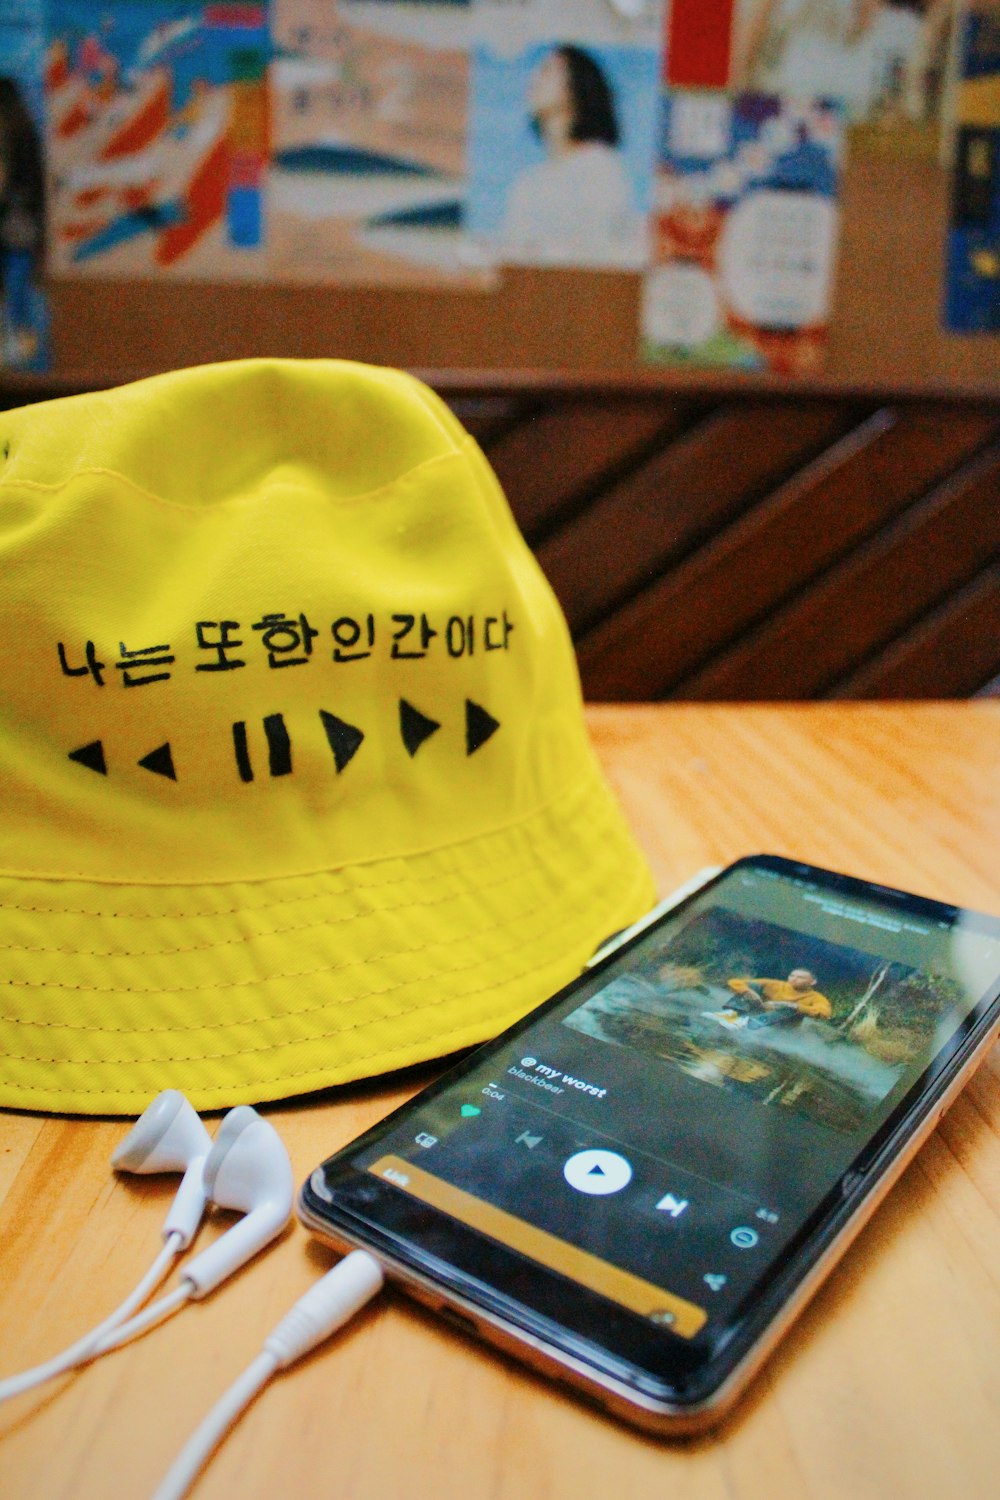 a cell phone sitting next to a yellow hat